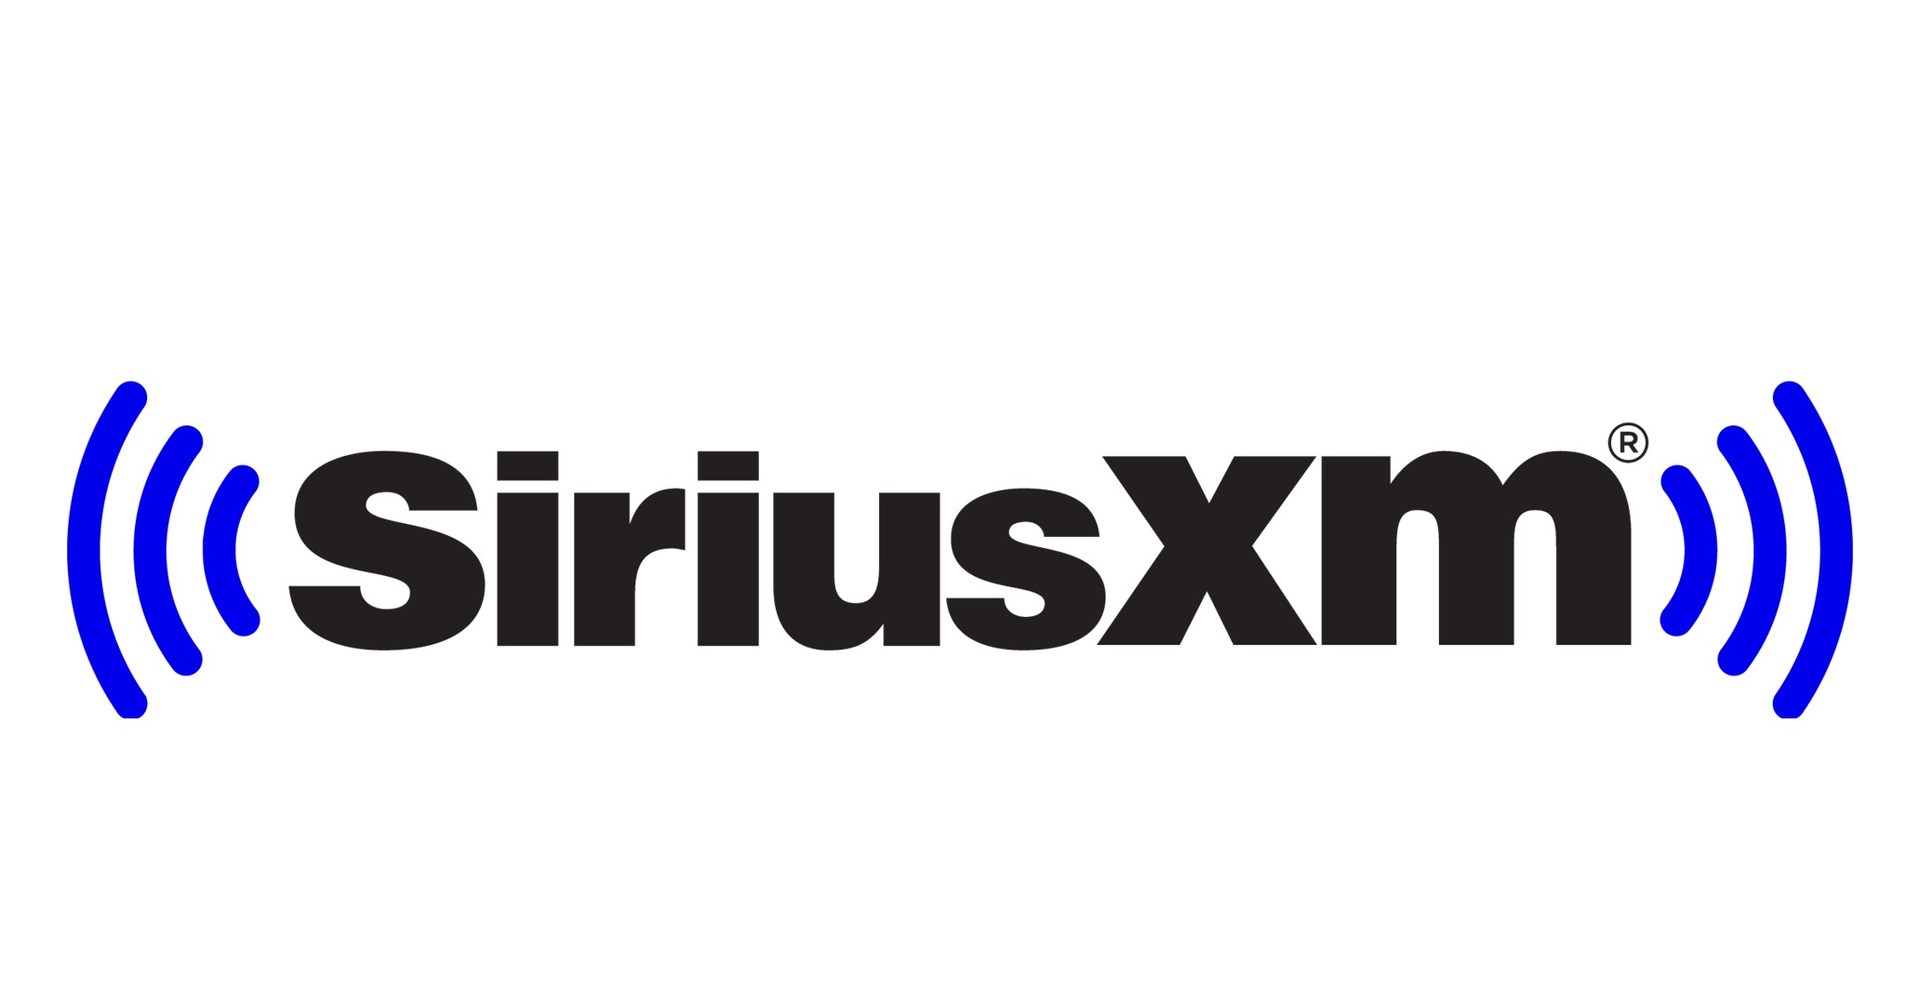 Listen to Every NFL Game Live on SiriusXM